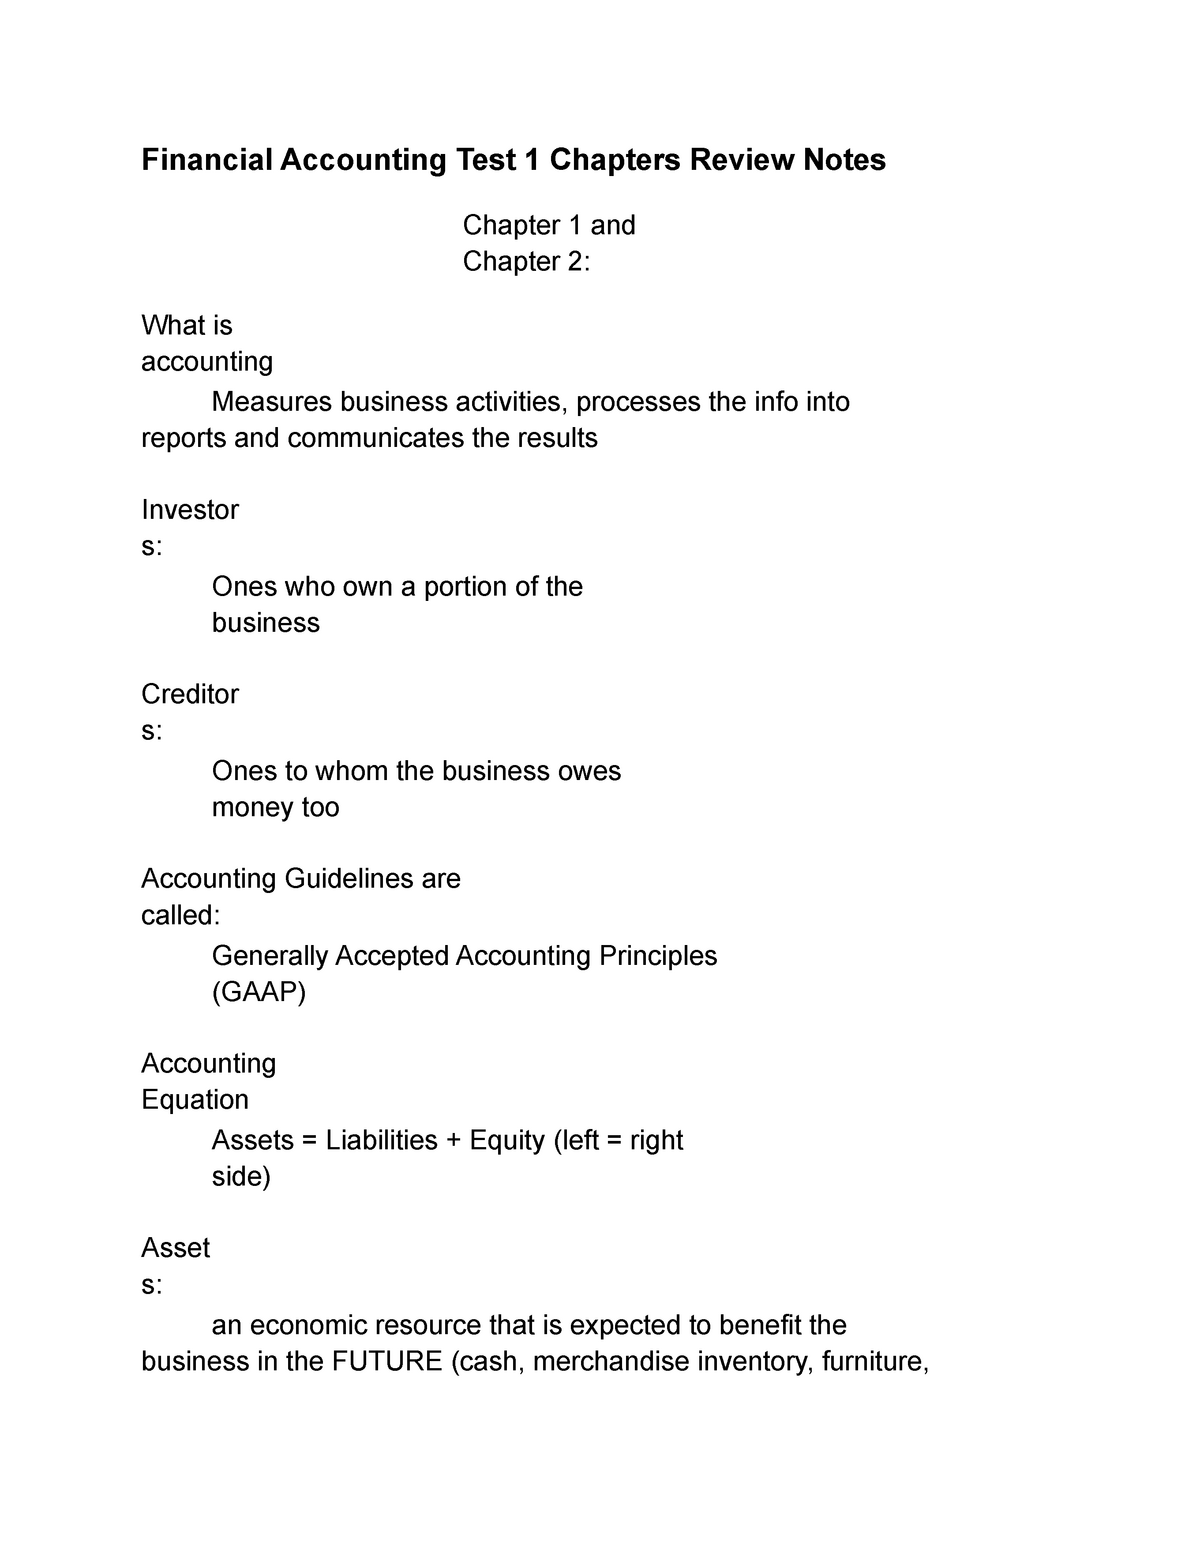 financial-account-ch-1-5-notes-financial-accounting-test-1-chapters